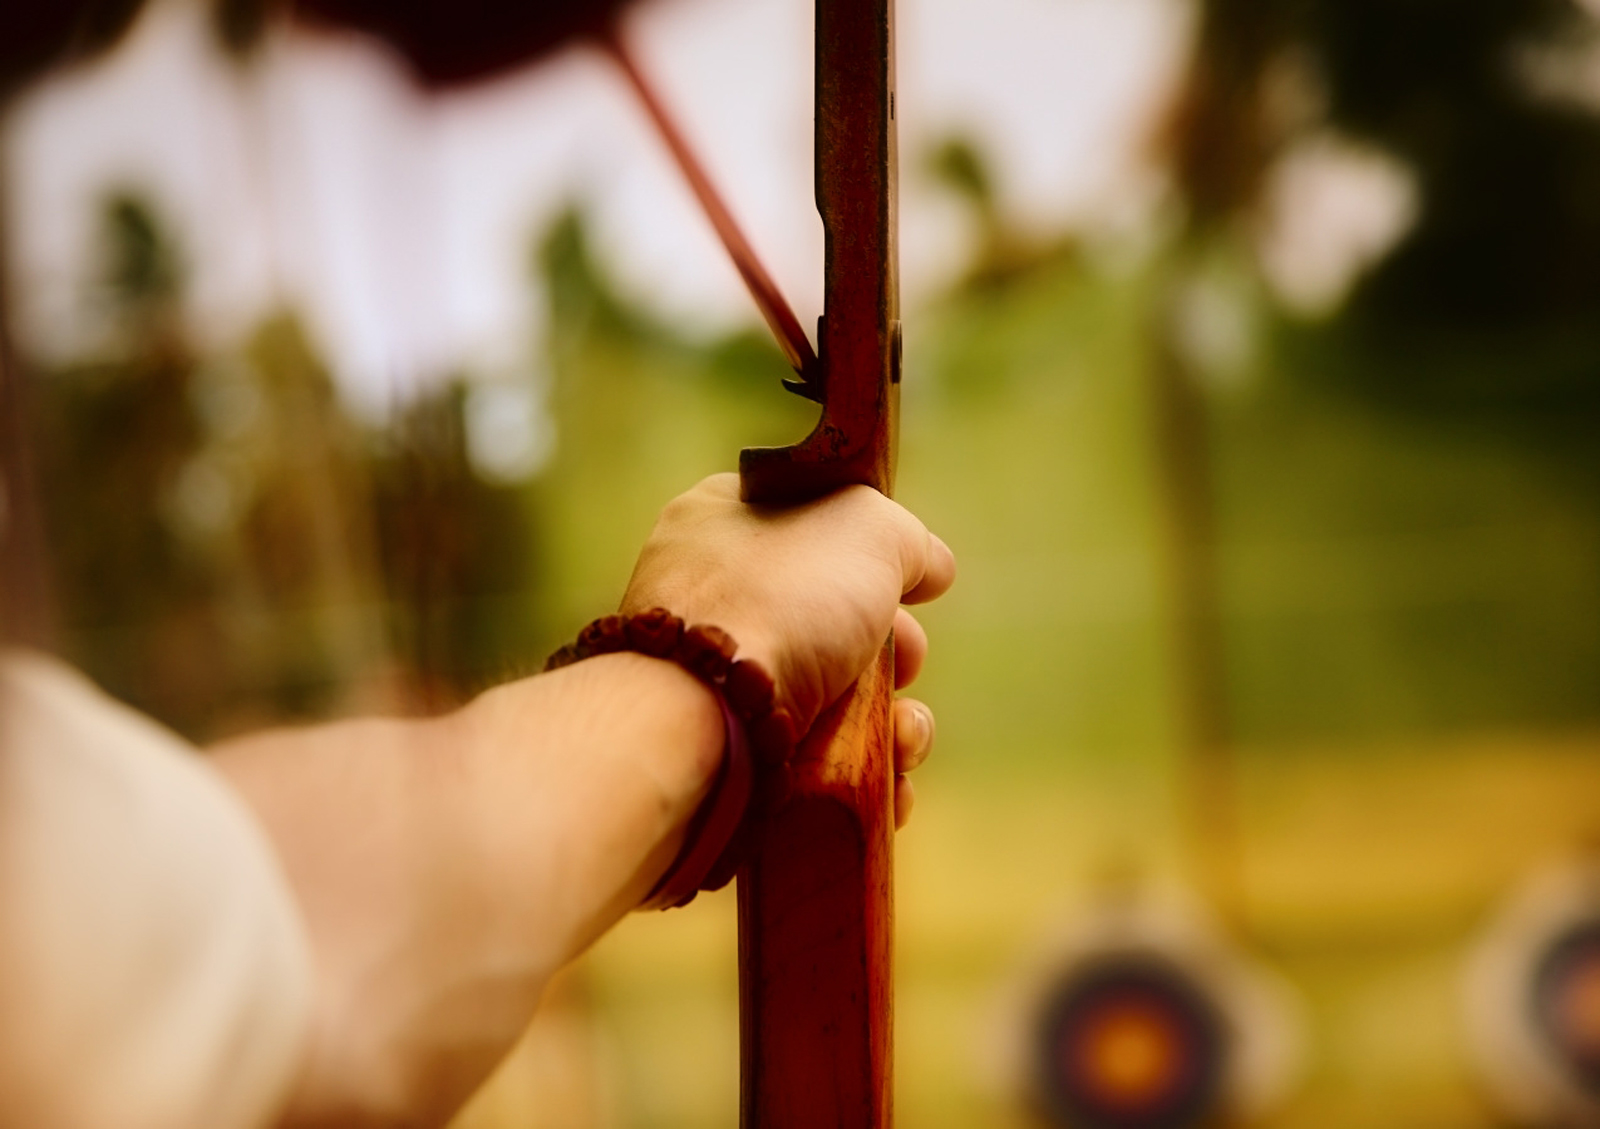 12 Archery HD Wallpapers | Backgrounds - Wallpaper Abyss